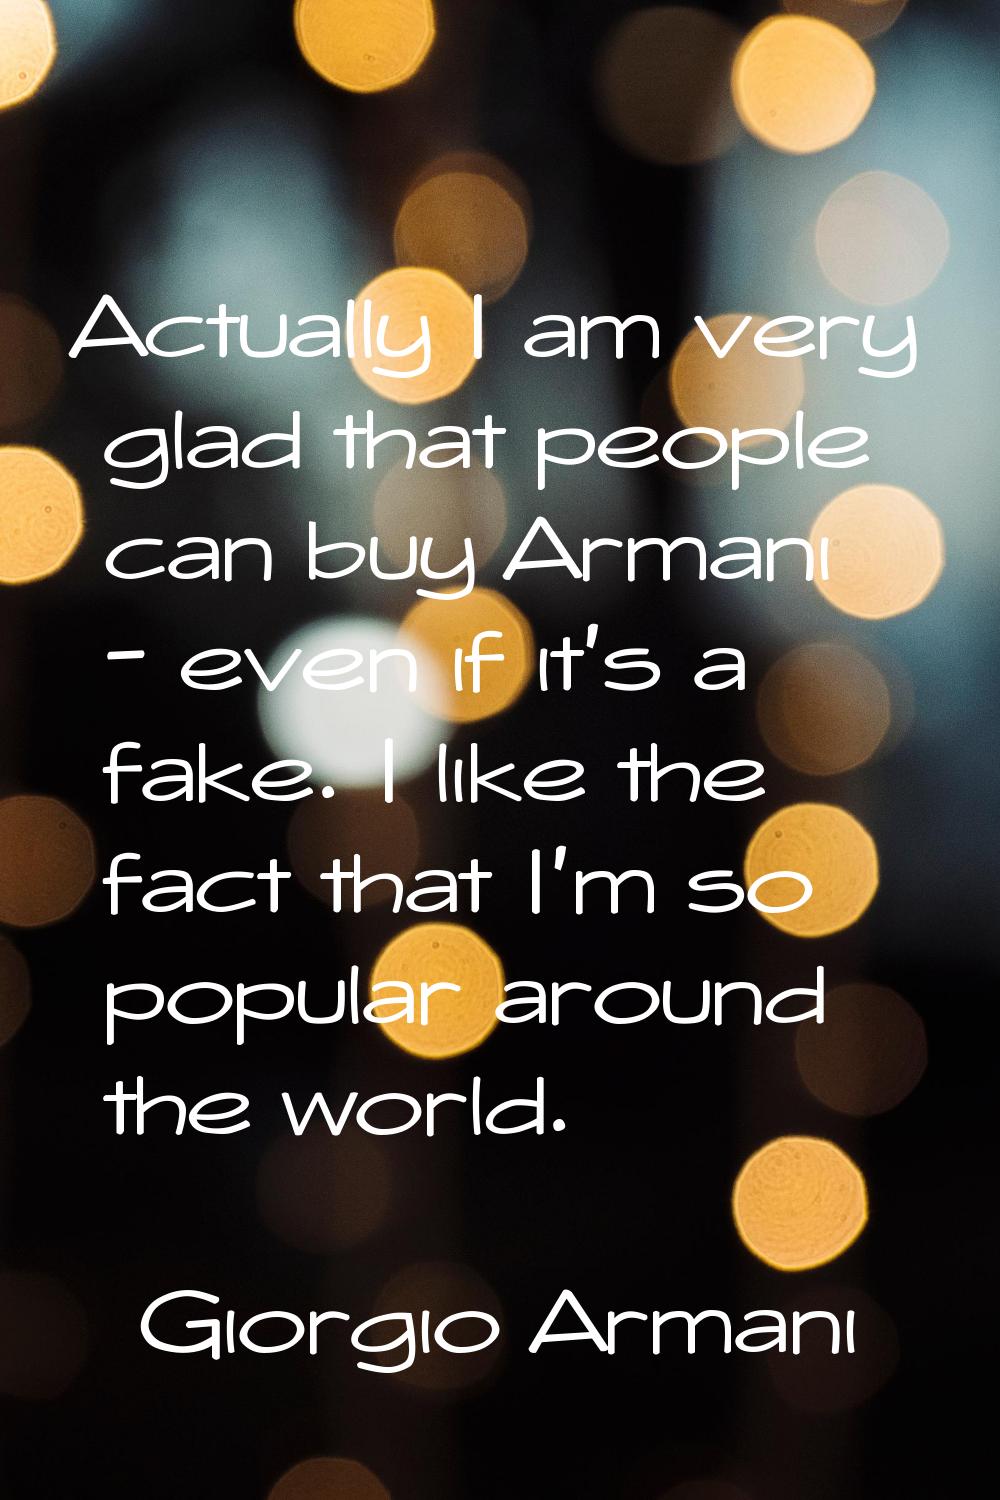 Actually I am very glad that people can buy Armani - even if it's a fake. I like the fact that I'm 